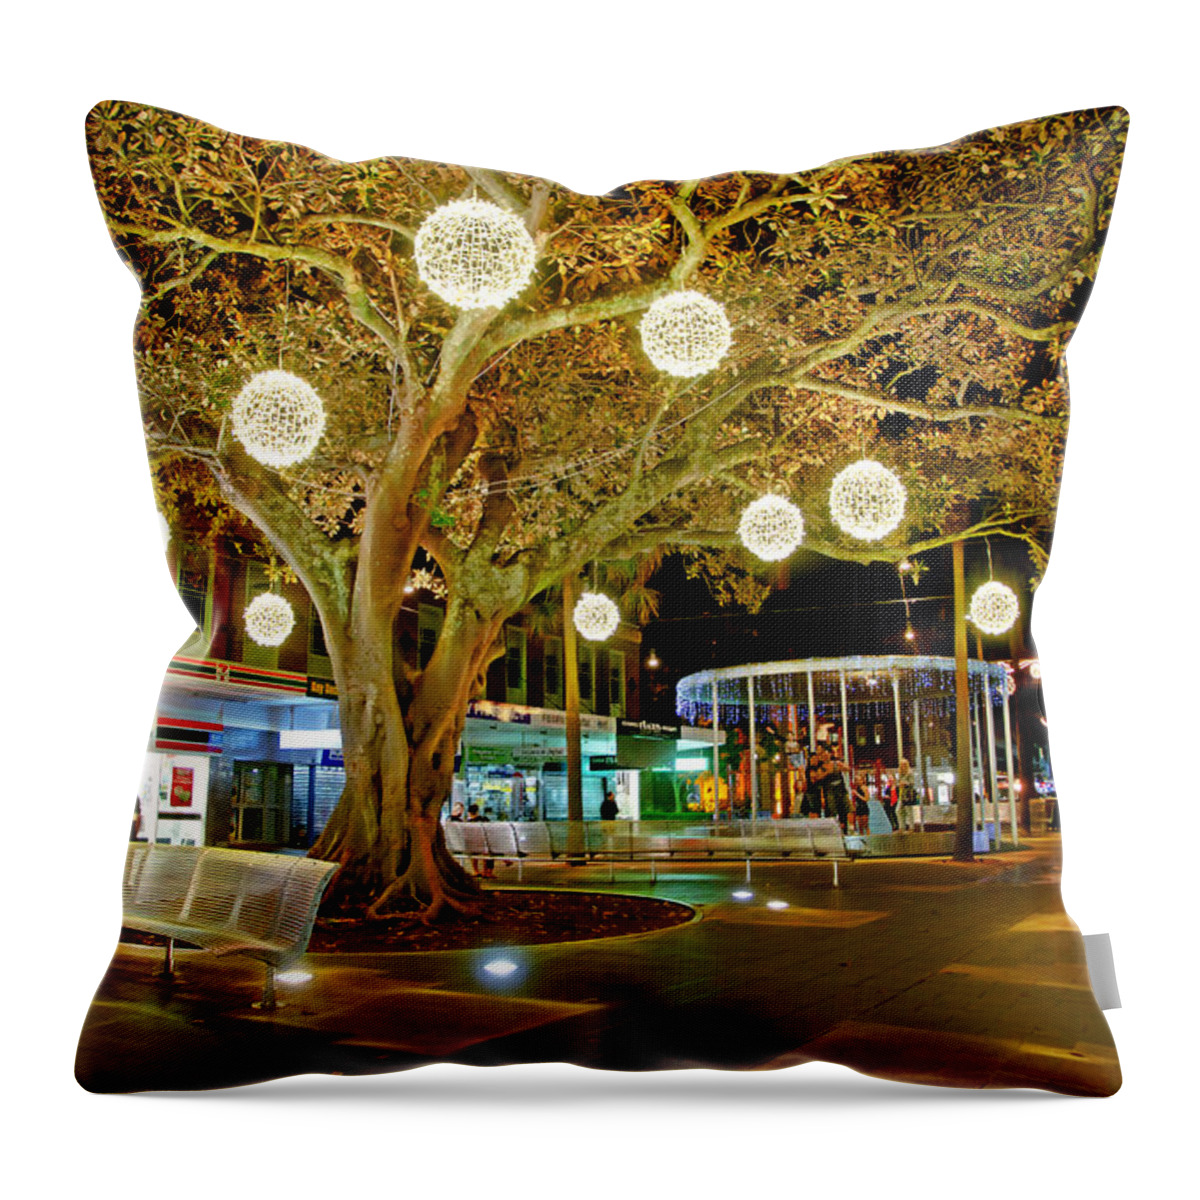 Manly. Corso Throw Pillow featuring the photograph The Famous Manly Corso At Christmas by Miroslava Jurcik